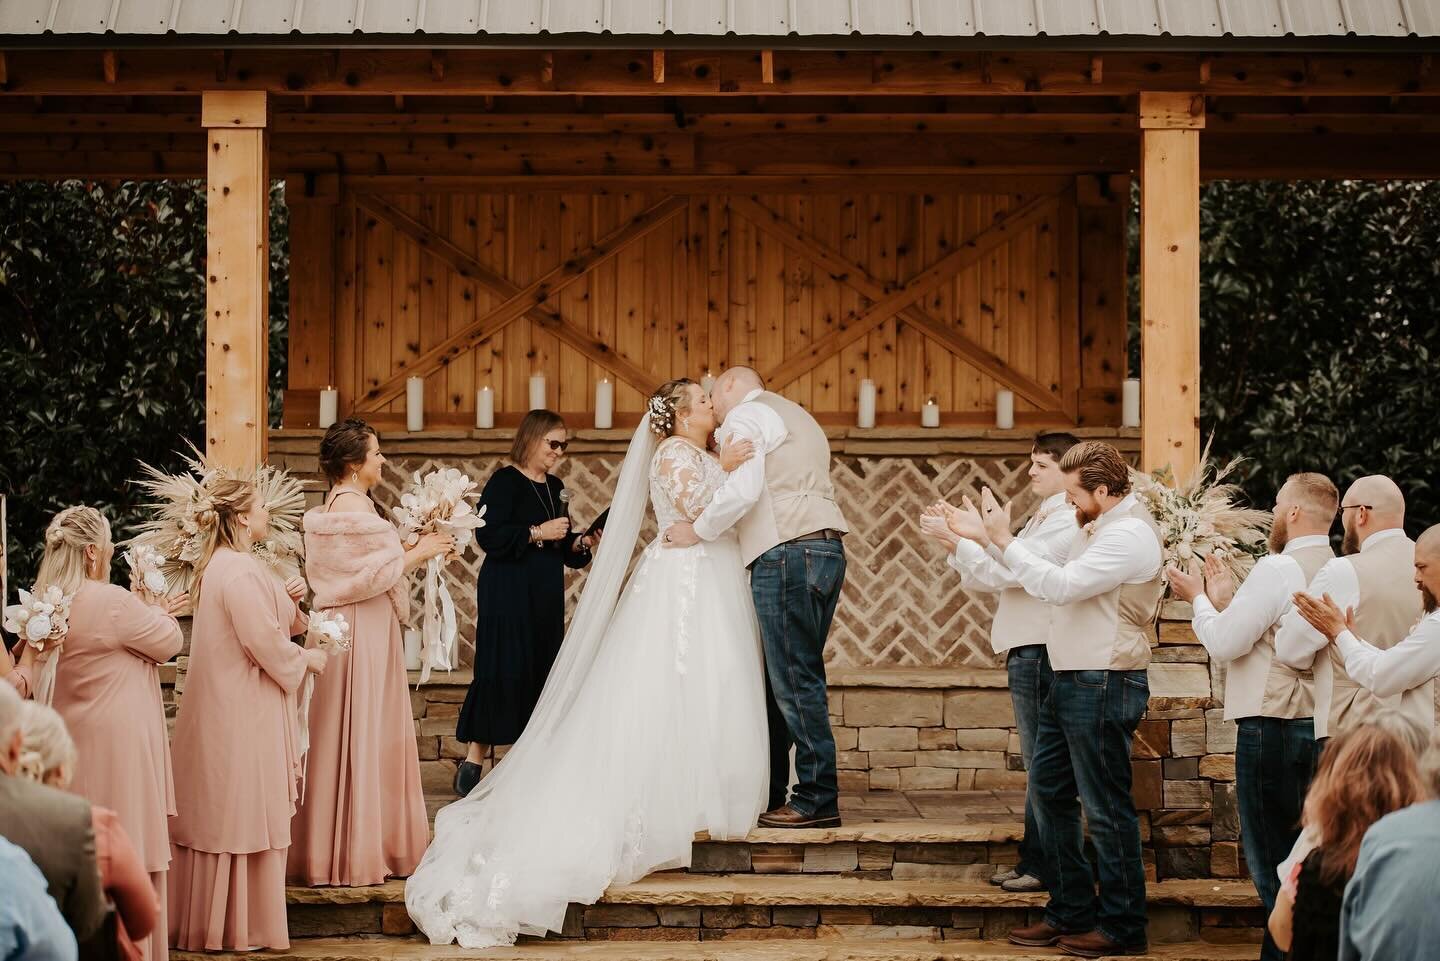 This is how you do a stylish, neutral country wedding. Vinewood Stables has the perfect backdrop for your Georgia wedding, filled with warmth from the textures and tones of our wedding pavilion, even on a chilly day.
Are you dreaming of a fall farm w